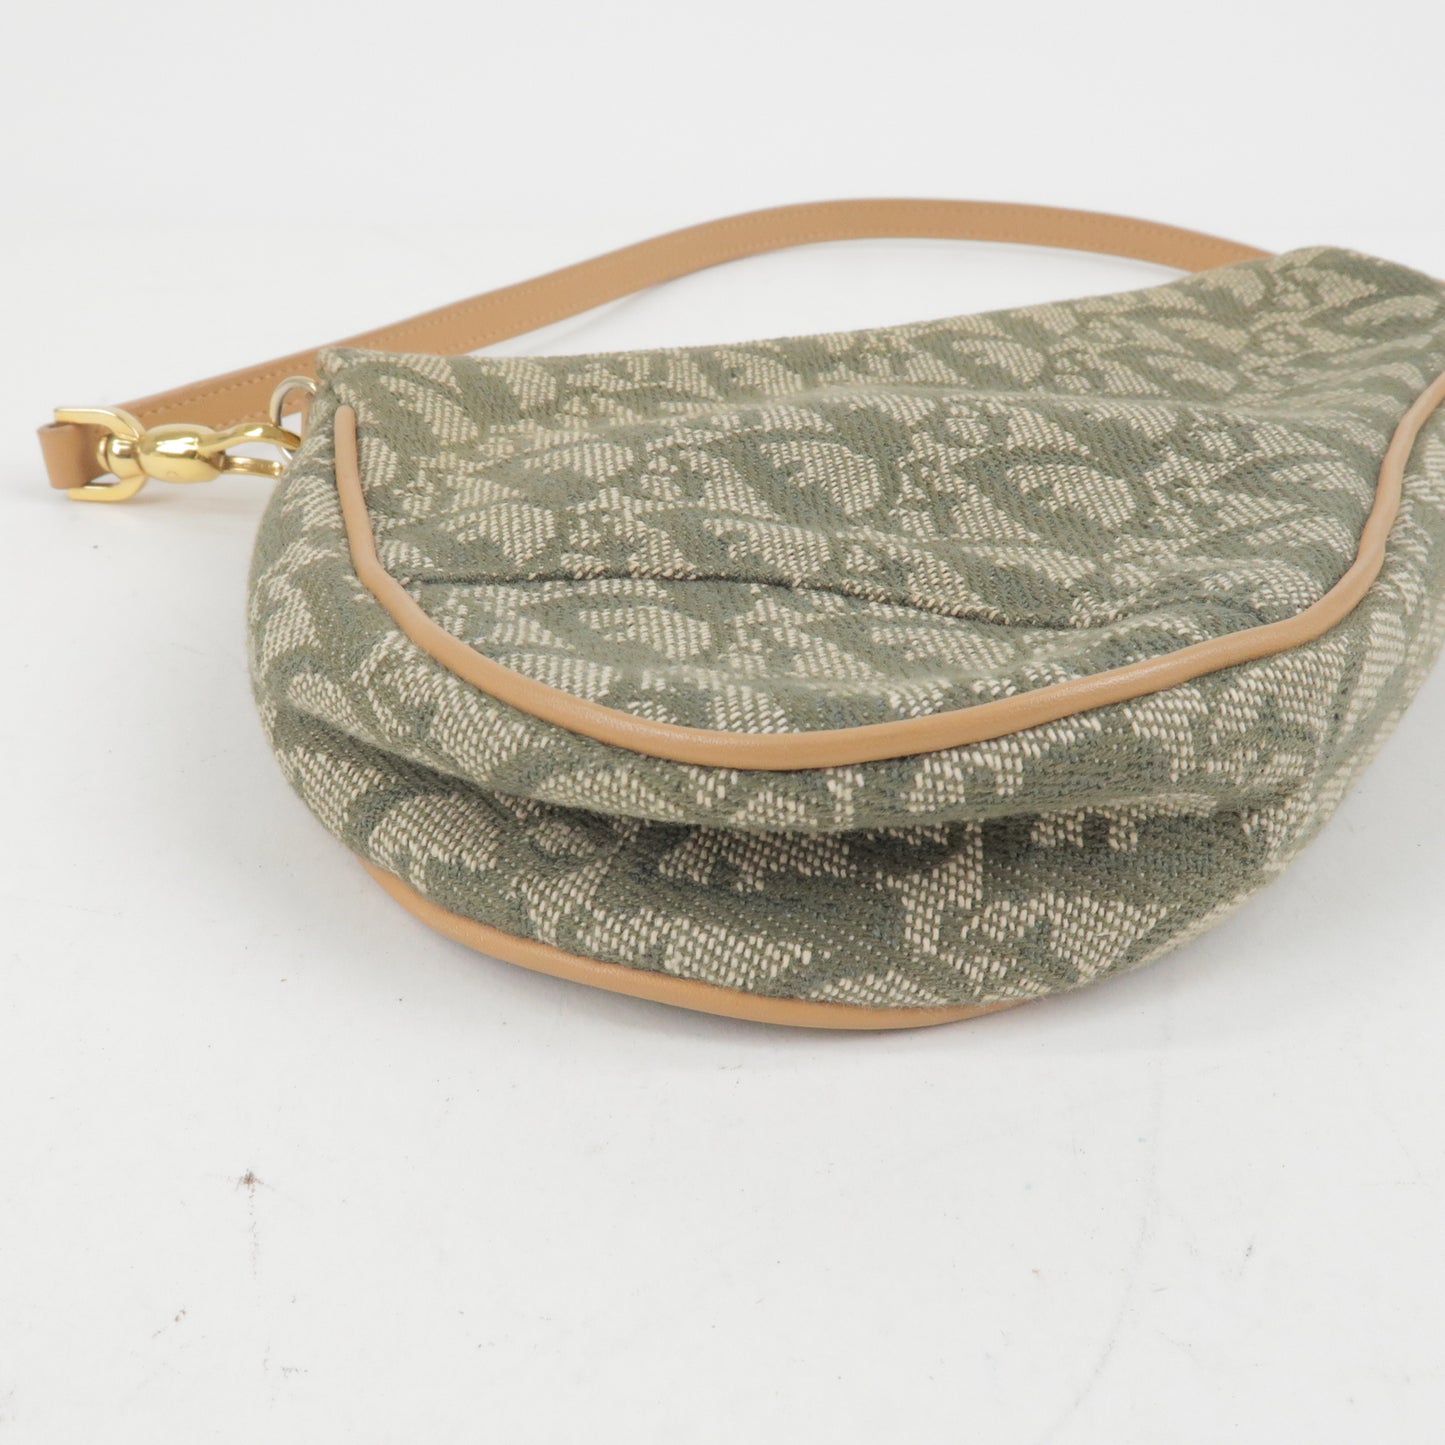 Christian Dior Trotter Canvas Leather Saddle Bag Pouch Green Beige